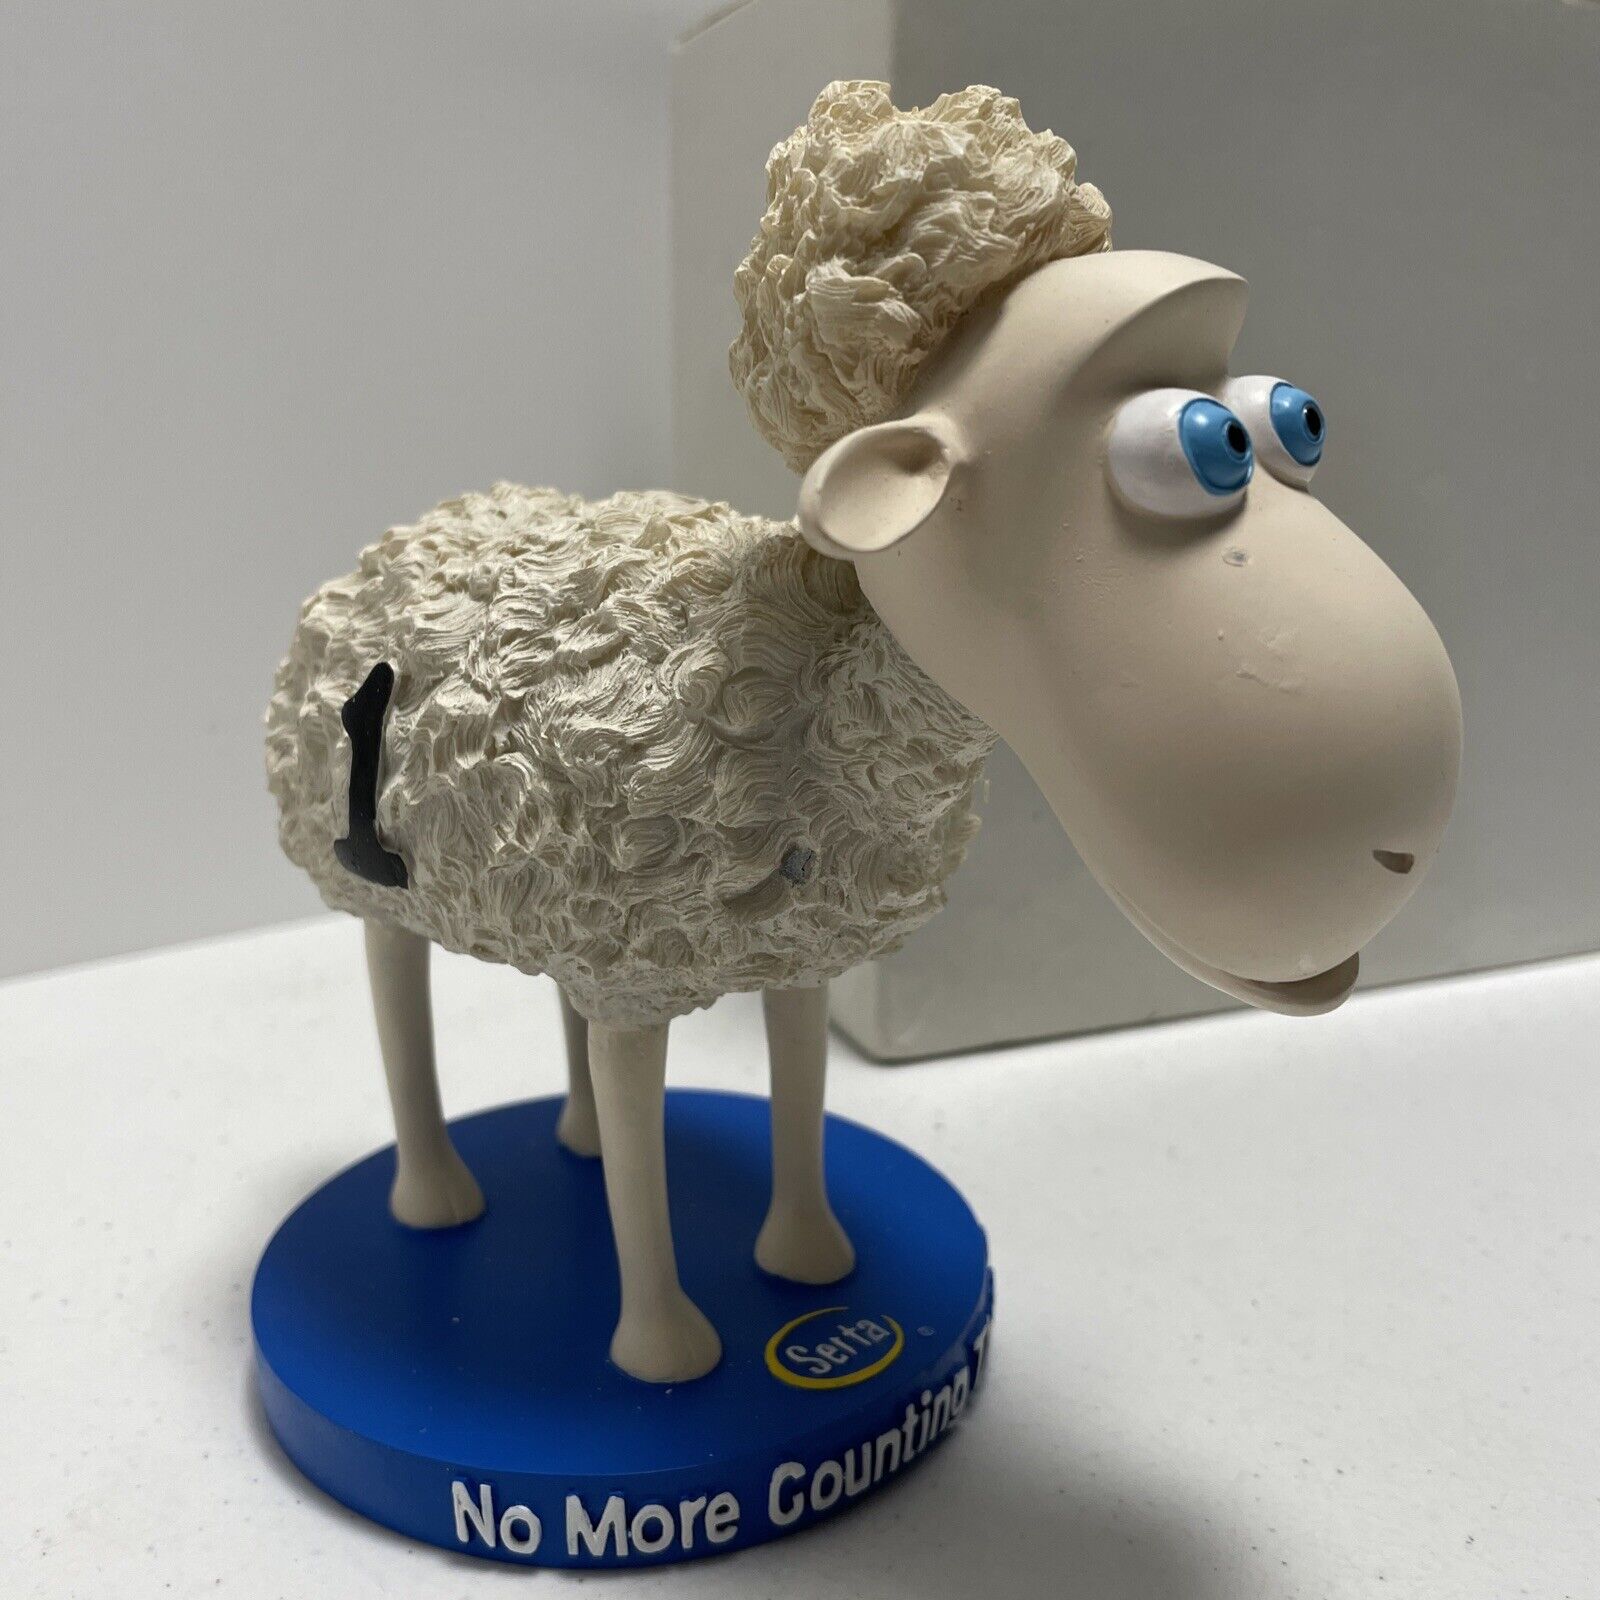 Serta Bobblehead Sheep #1 Promo Figurine No More Counting These Guys